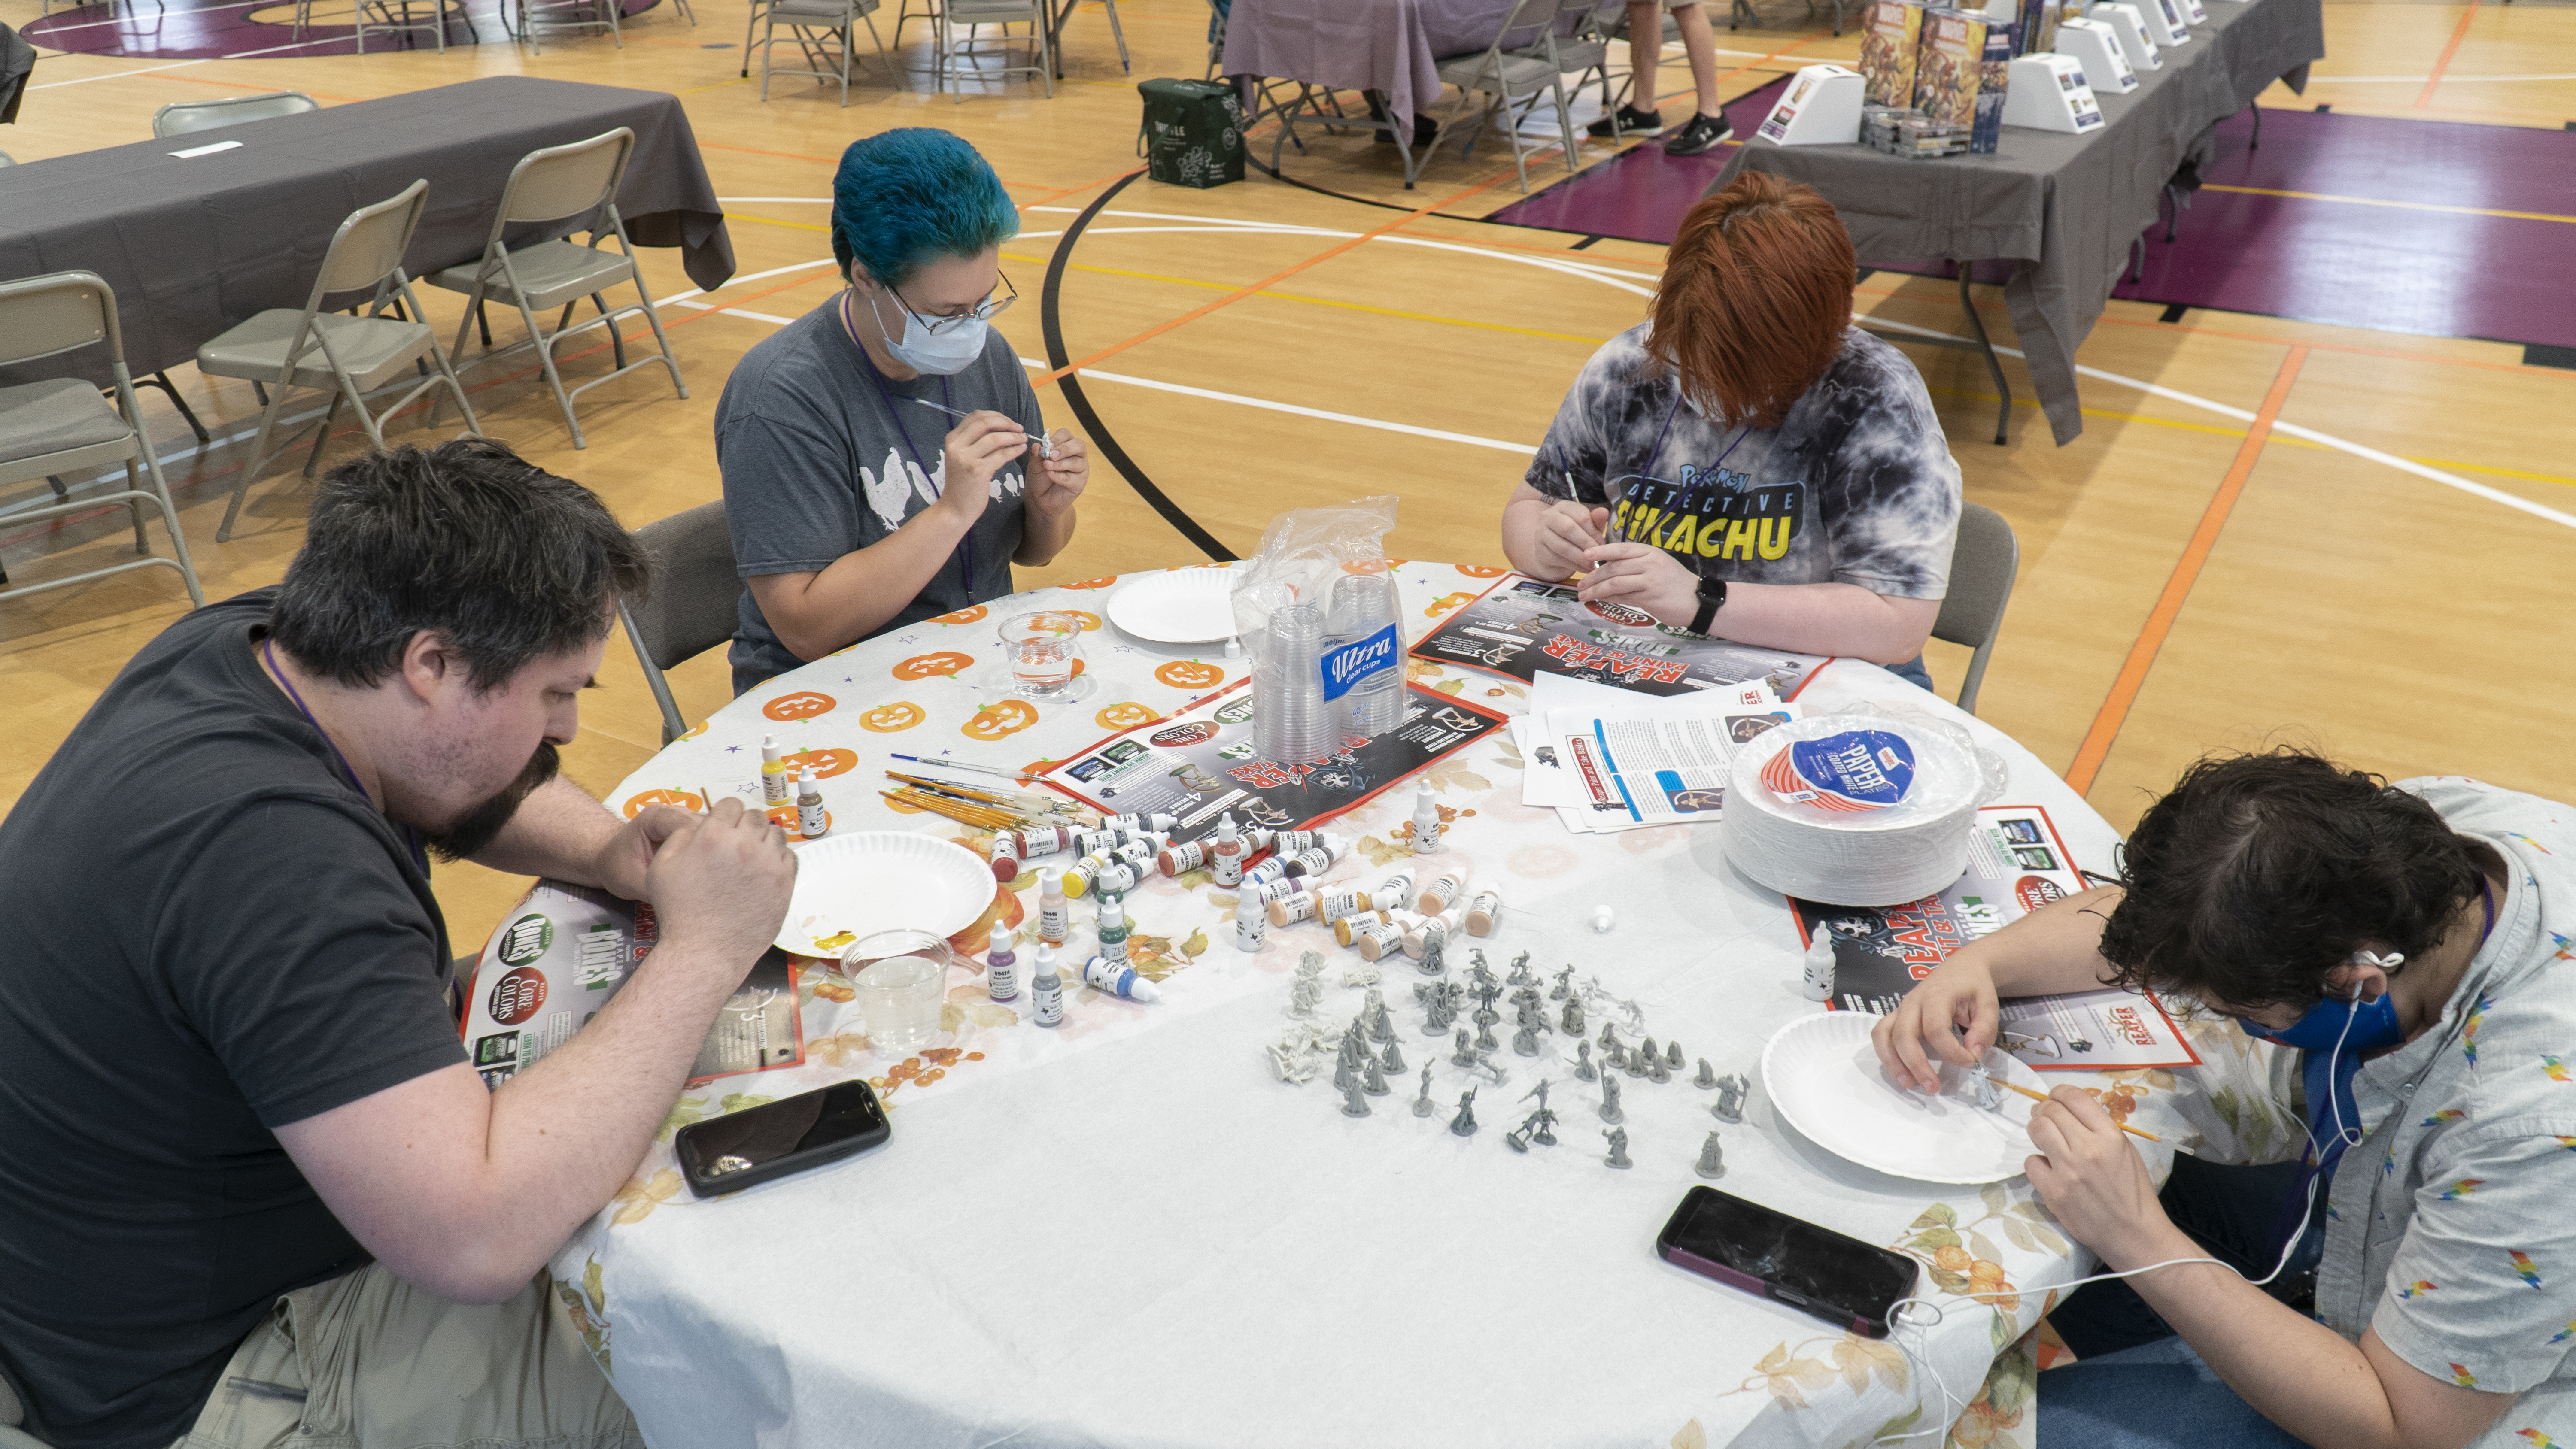 People sitting around a table painting miniatures